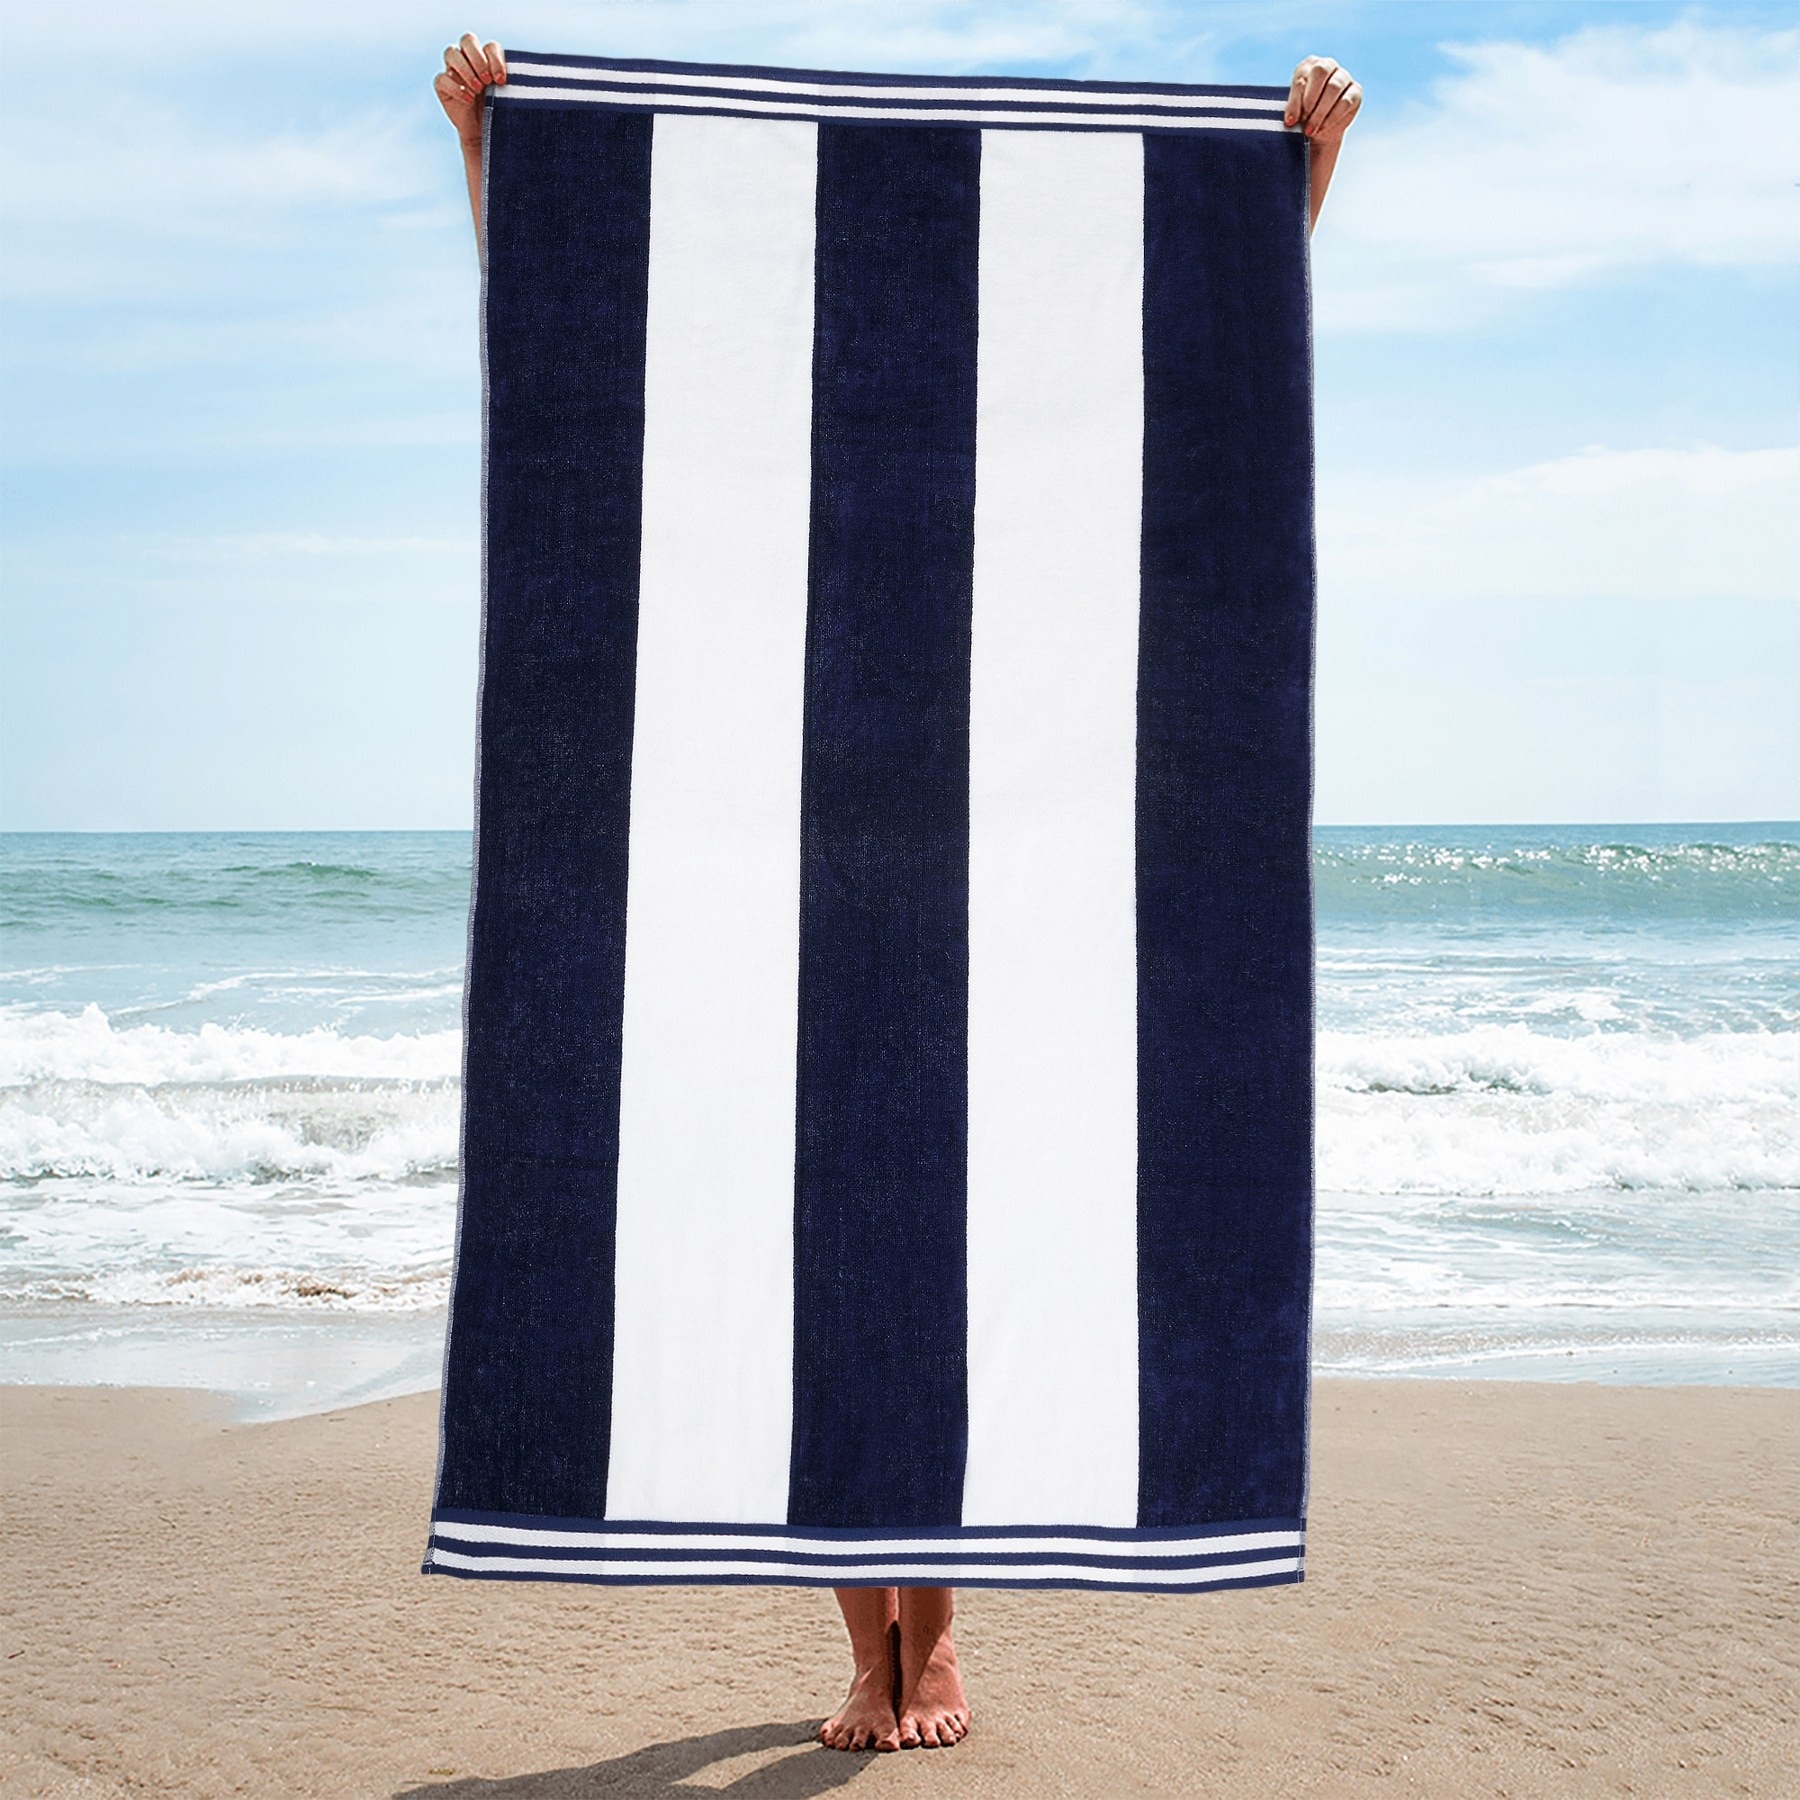 https://ak1.ostkcdn.com/images/products/is/images/direct/60e1a2aa54cfe909c1bc0a0fa5e4181436fb4640/Cabana-Stripe-Oversized-Cotton-Beach-Towel-by-Superior.jpg